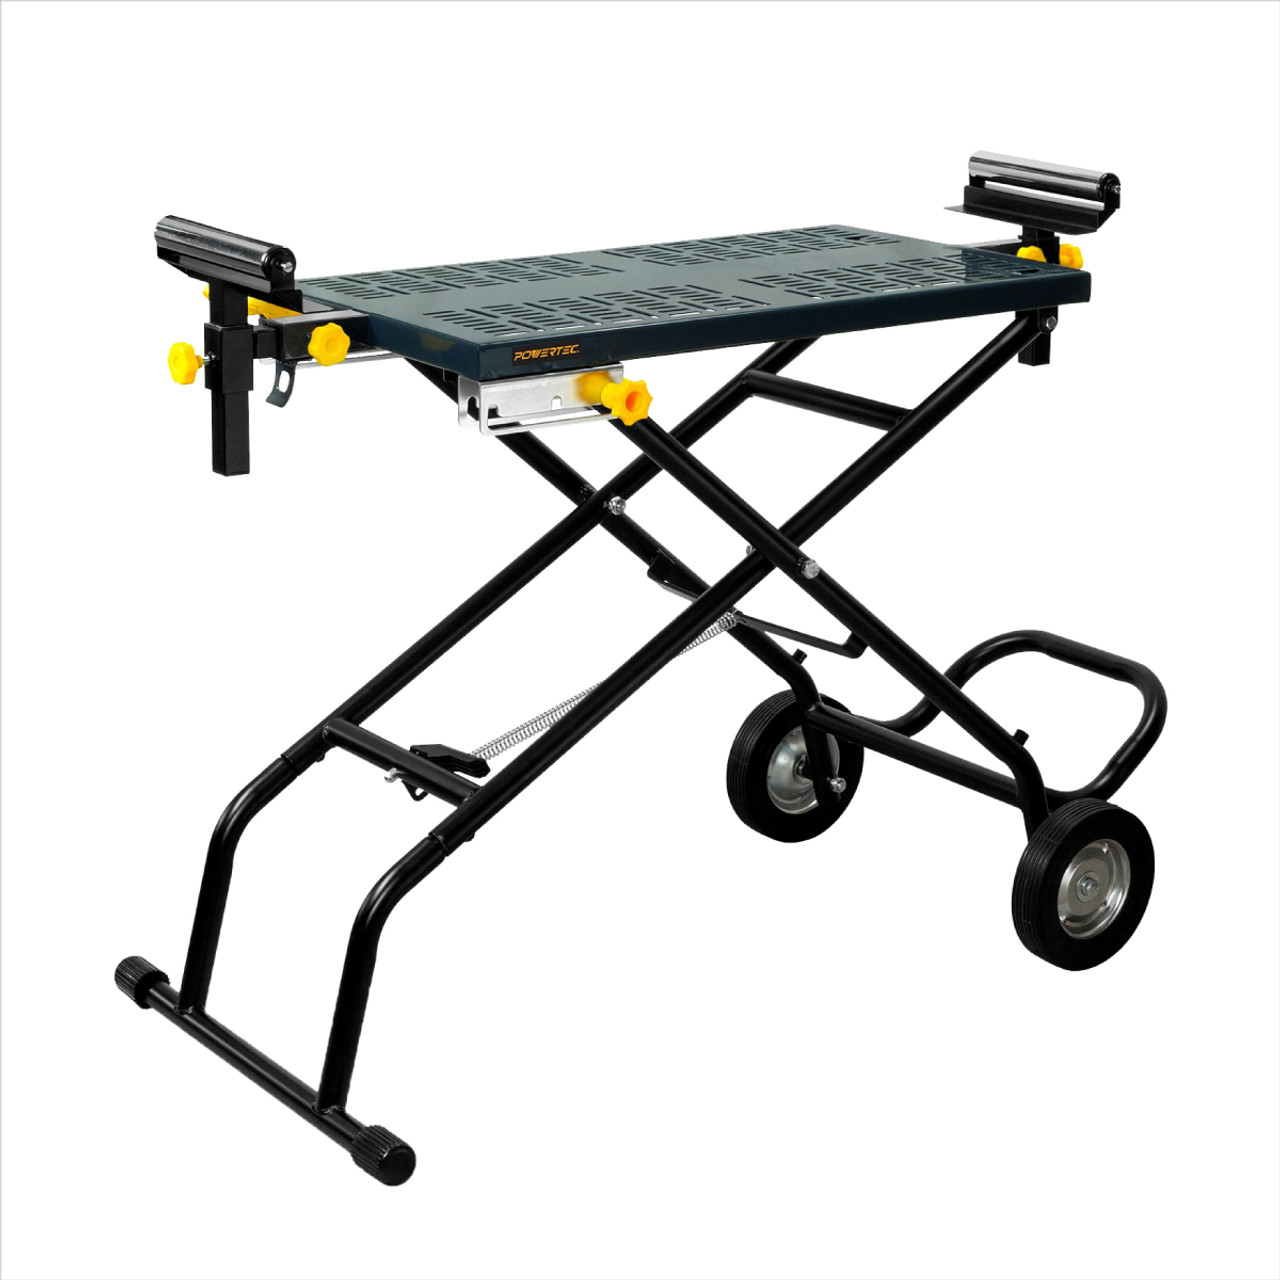 POWERTEC-Universal Mounting Deluxe Rolling Stand with impressive 440 lb  maximum weight capacity POWERTEC Saw Stands, Woodwork Tools  Accessories